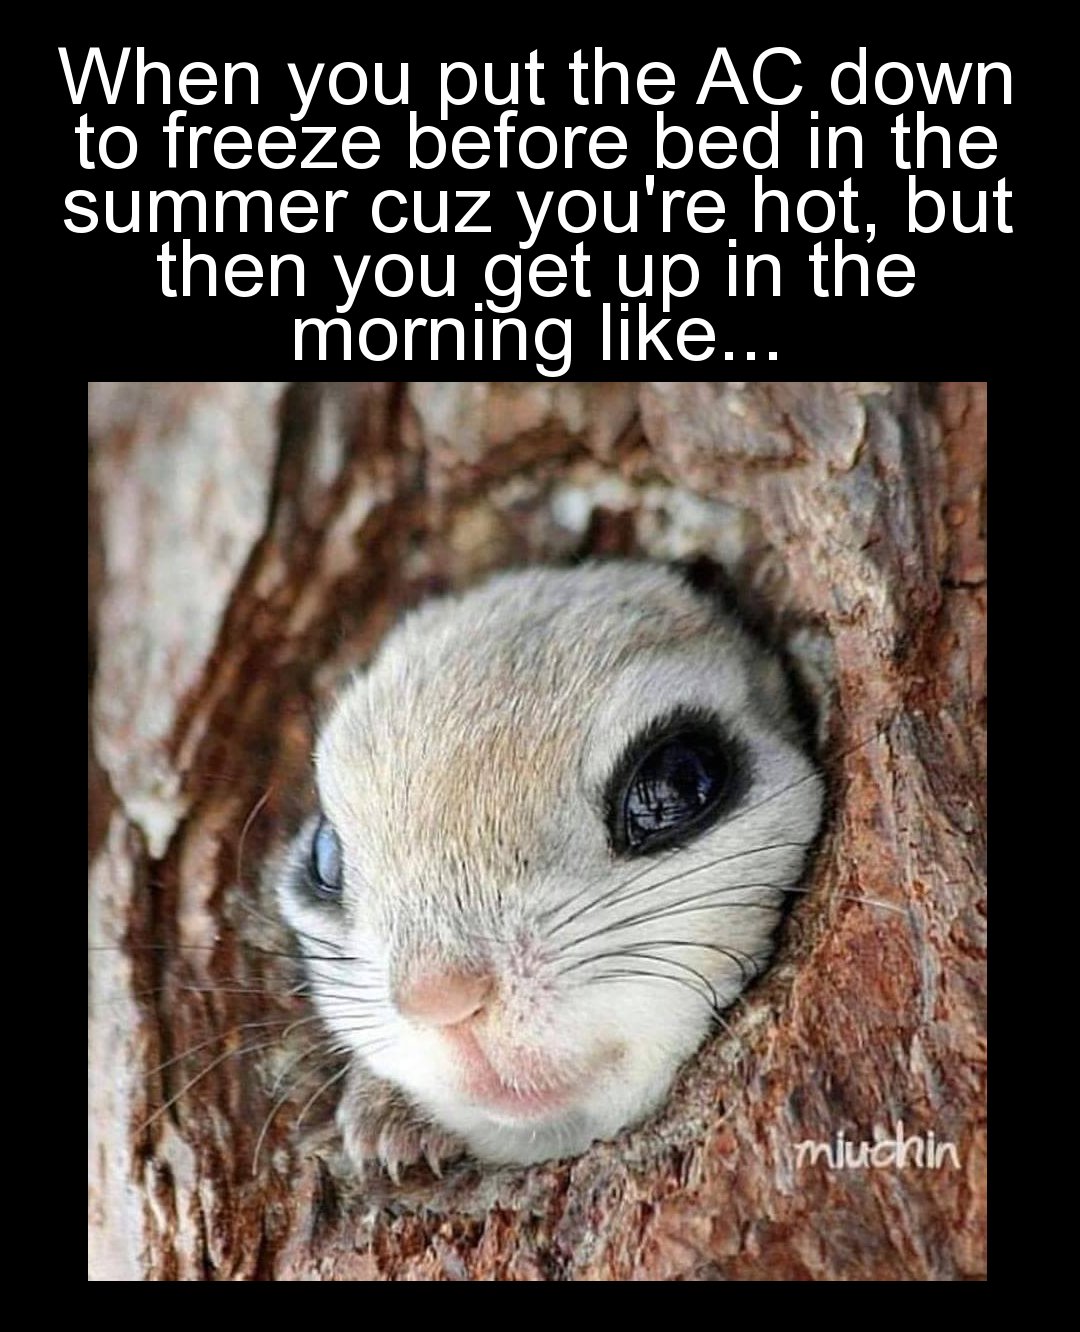 flying squirrel face - When you put the Ac down to freeze before bed in the summer cuz you're hot, but then you get up in the morning ... miuchin